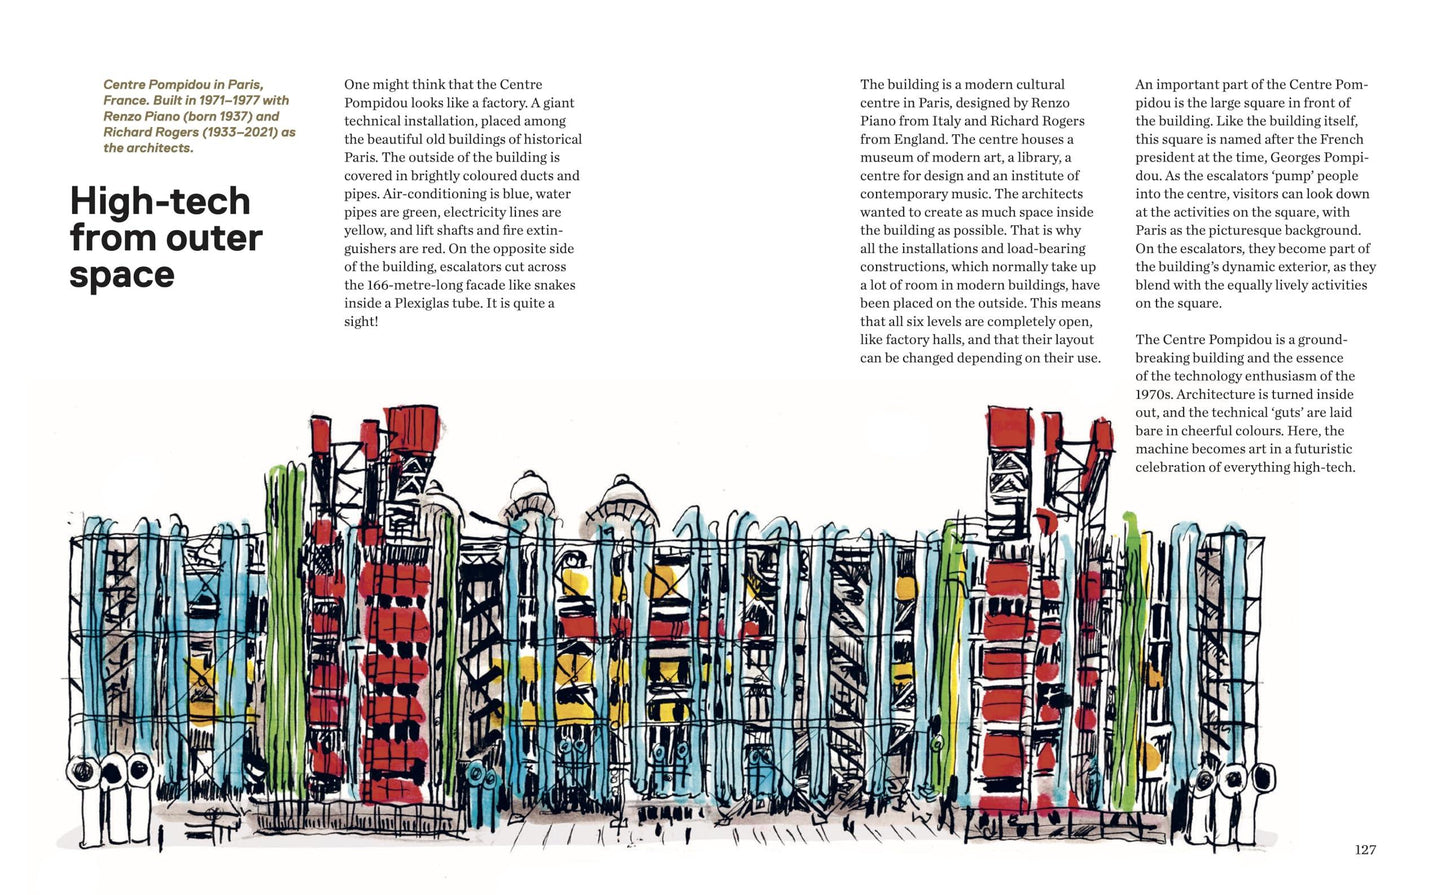 The Little Book of Architectural History for Children and Curious Grown-Ups